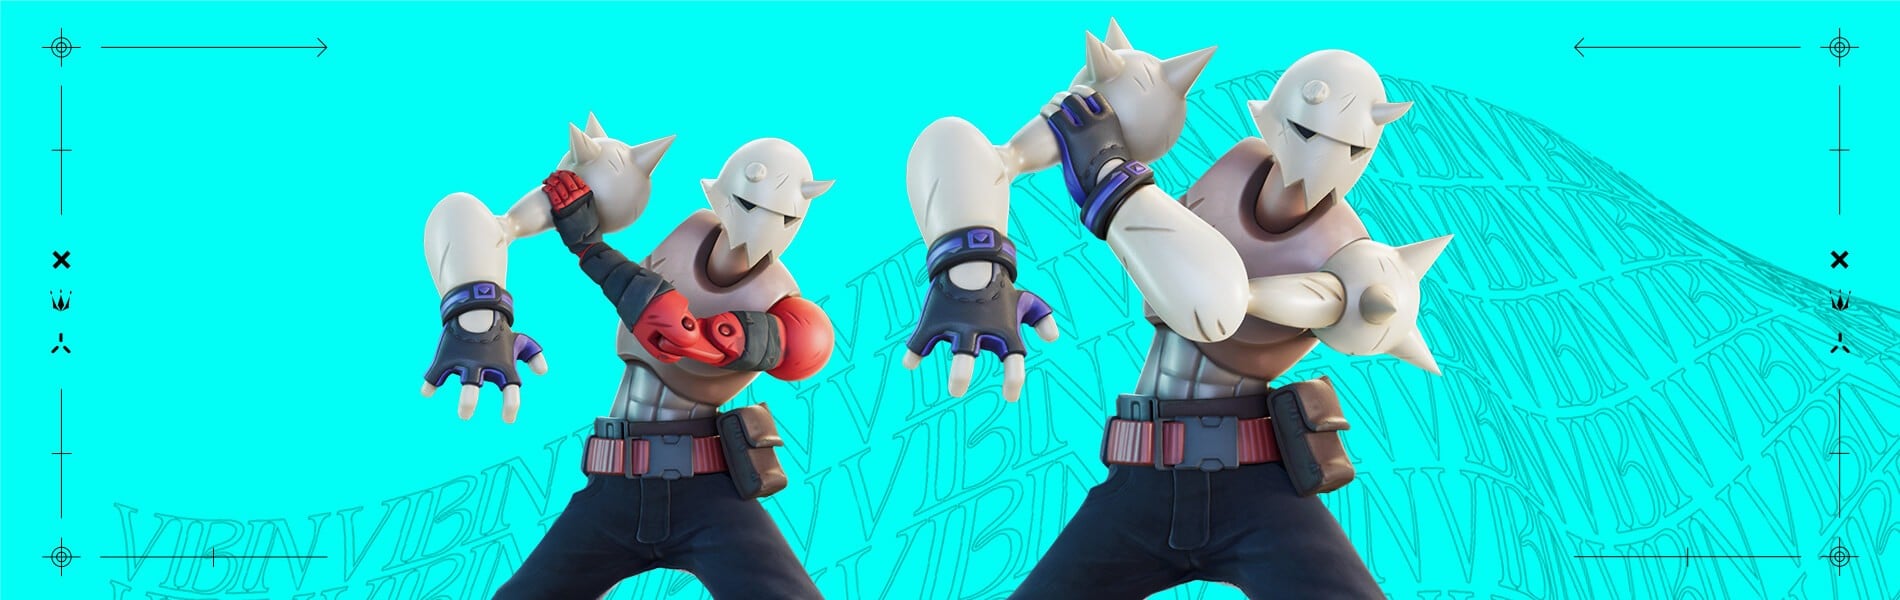 Snap, customizable Fortnite characters